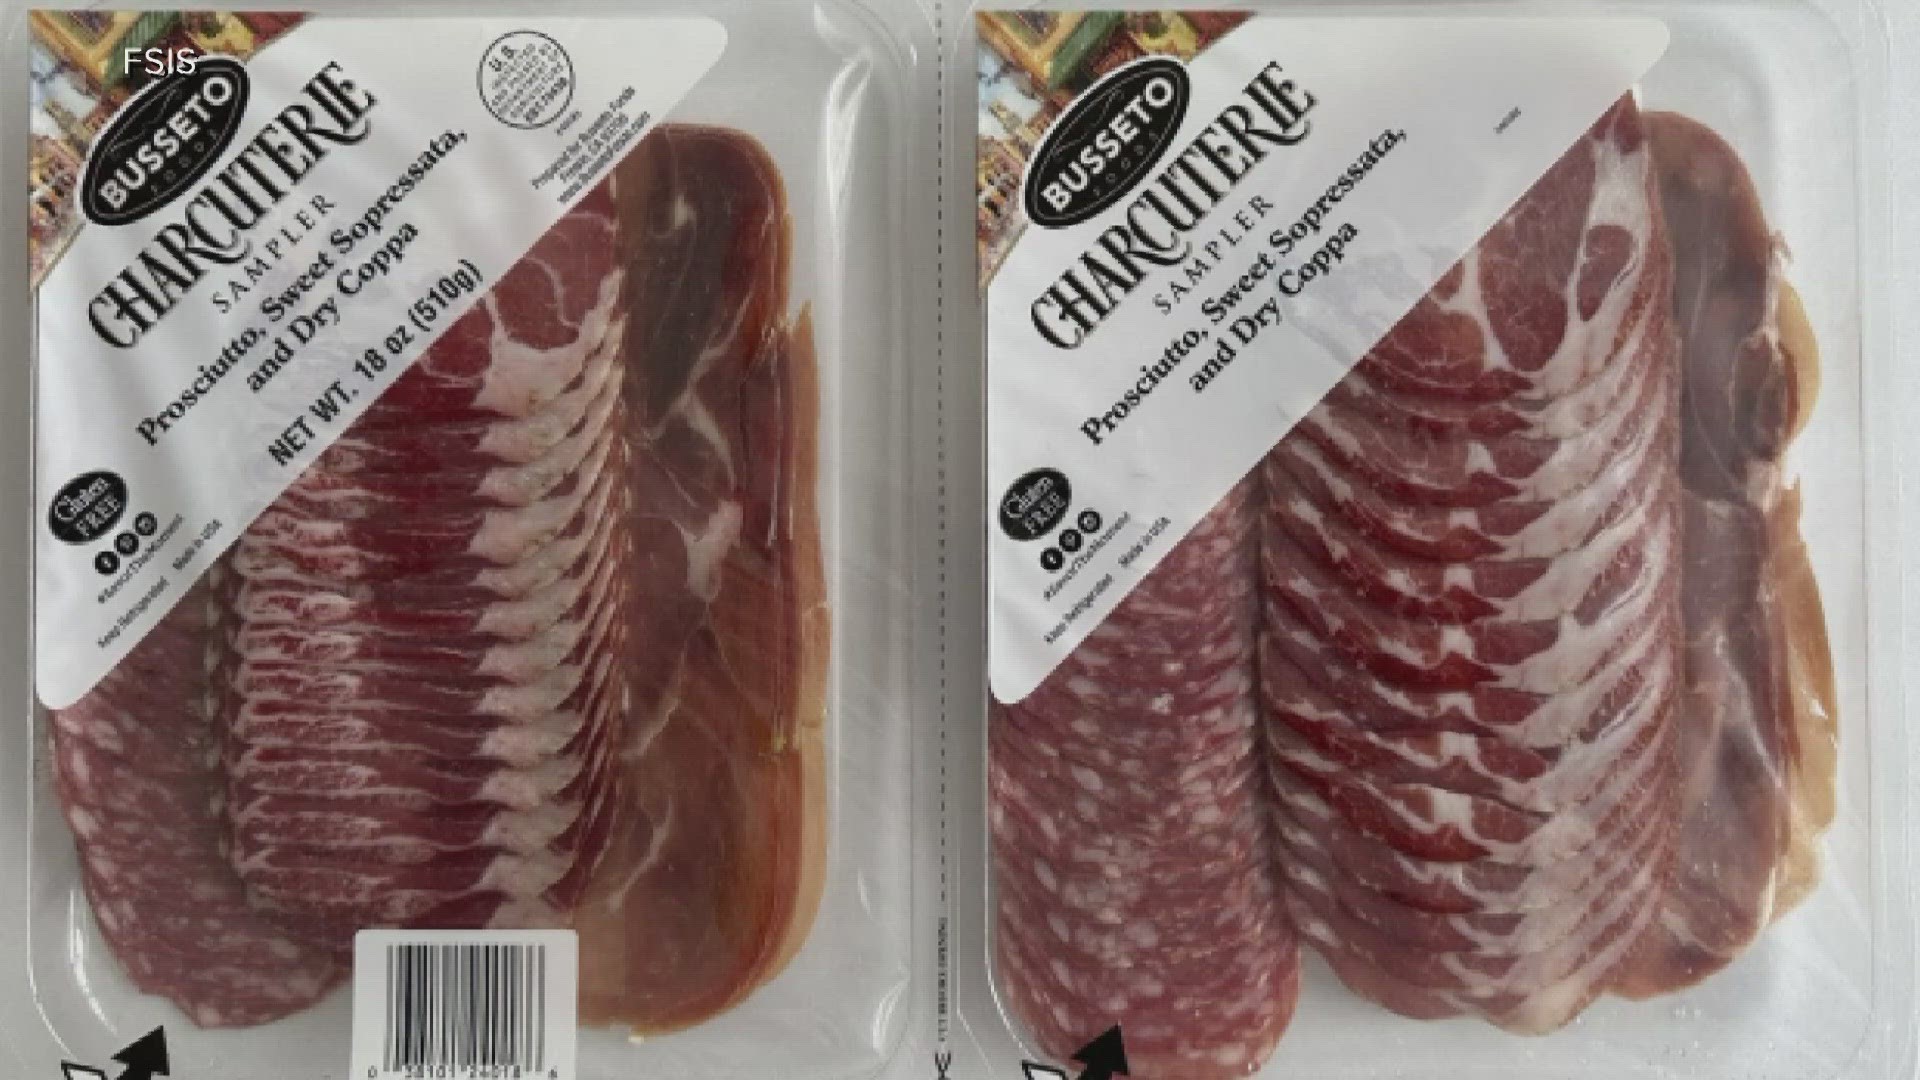 Officials are warning people to not eat a certain ready-to-eat charcuterie product over salmonella concerns.